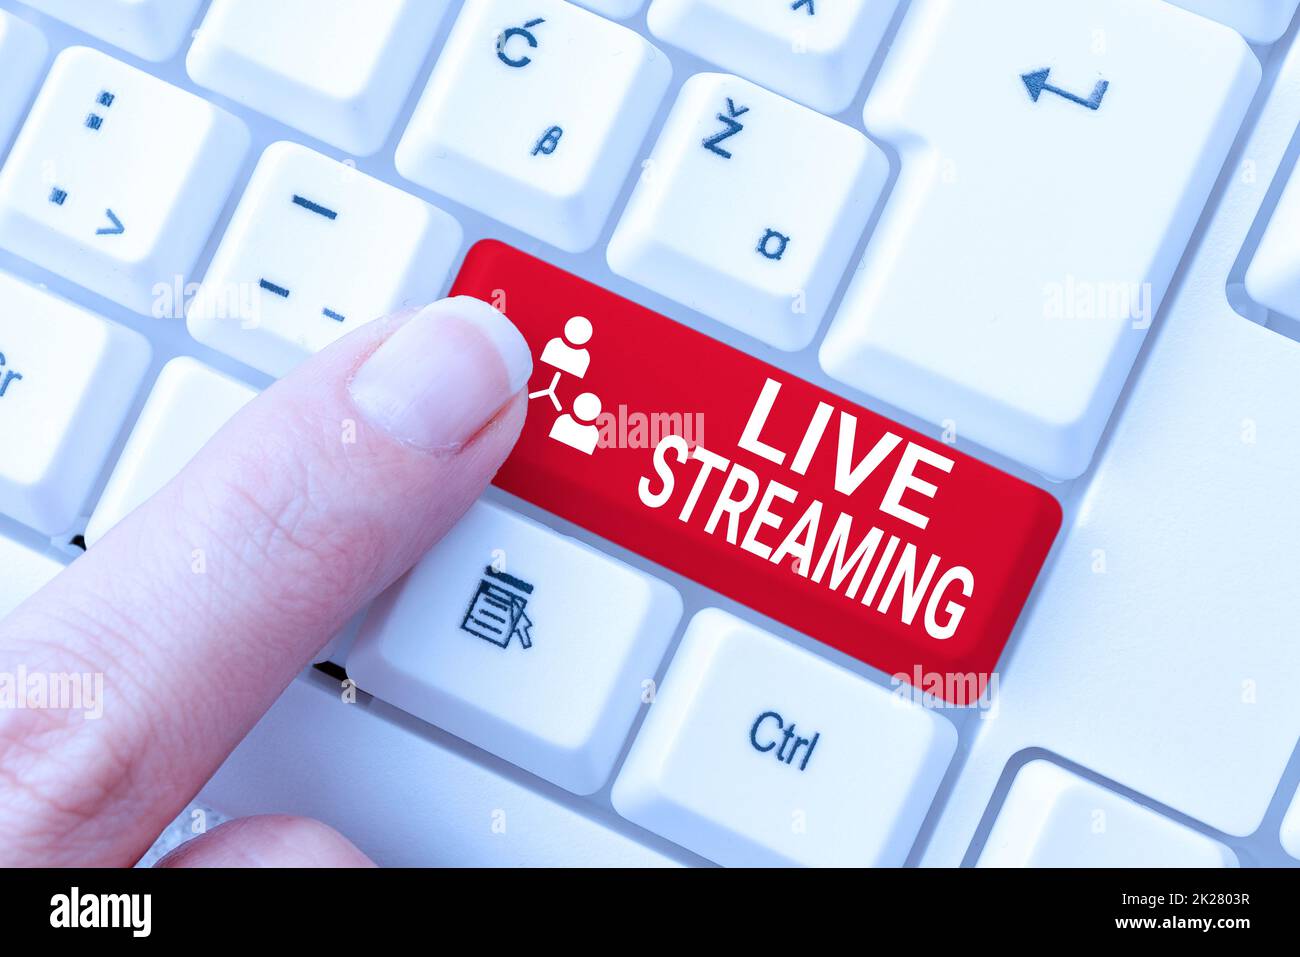 Sign displaying Live Streaming. Business idea displaying audio or media content through digital devices Editing And Publishing Online News Article, Typing Visual Novel Scripts Stock Photo